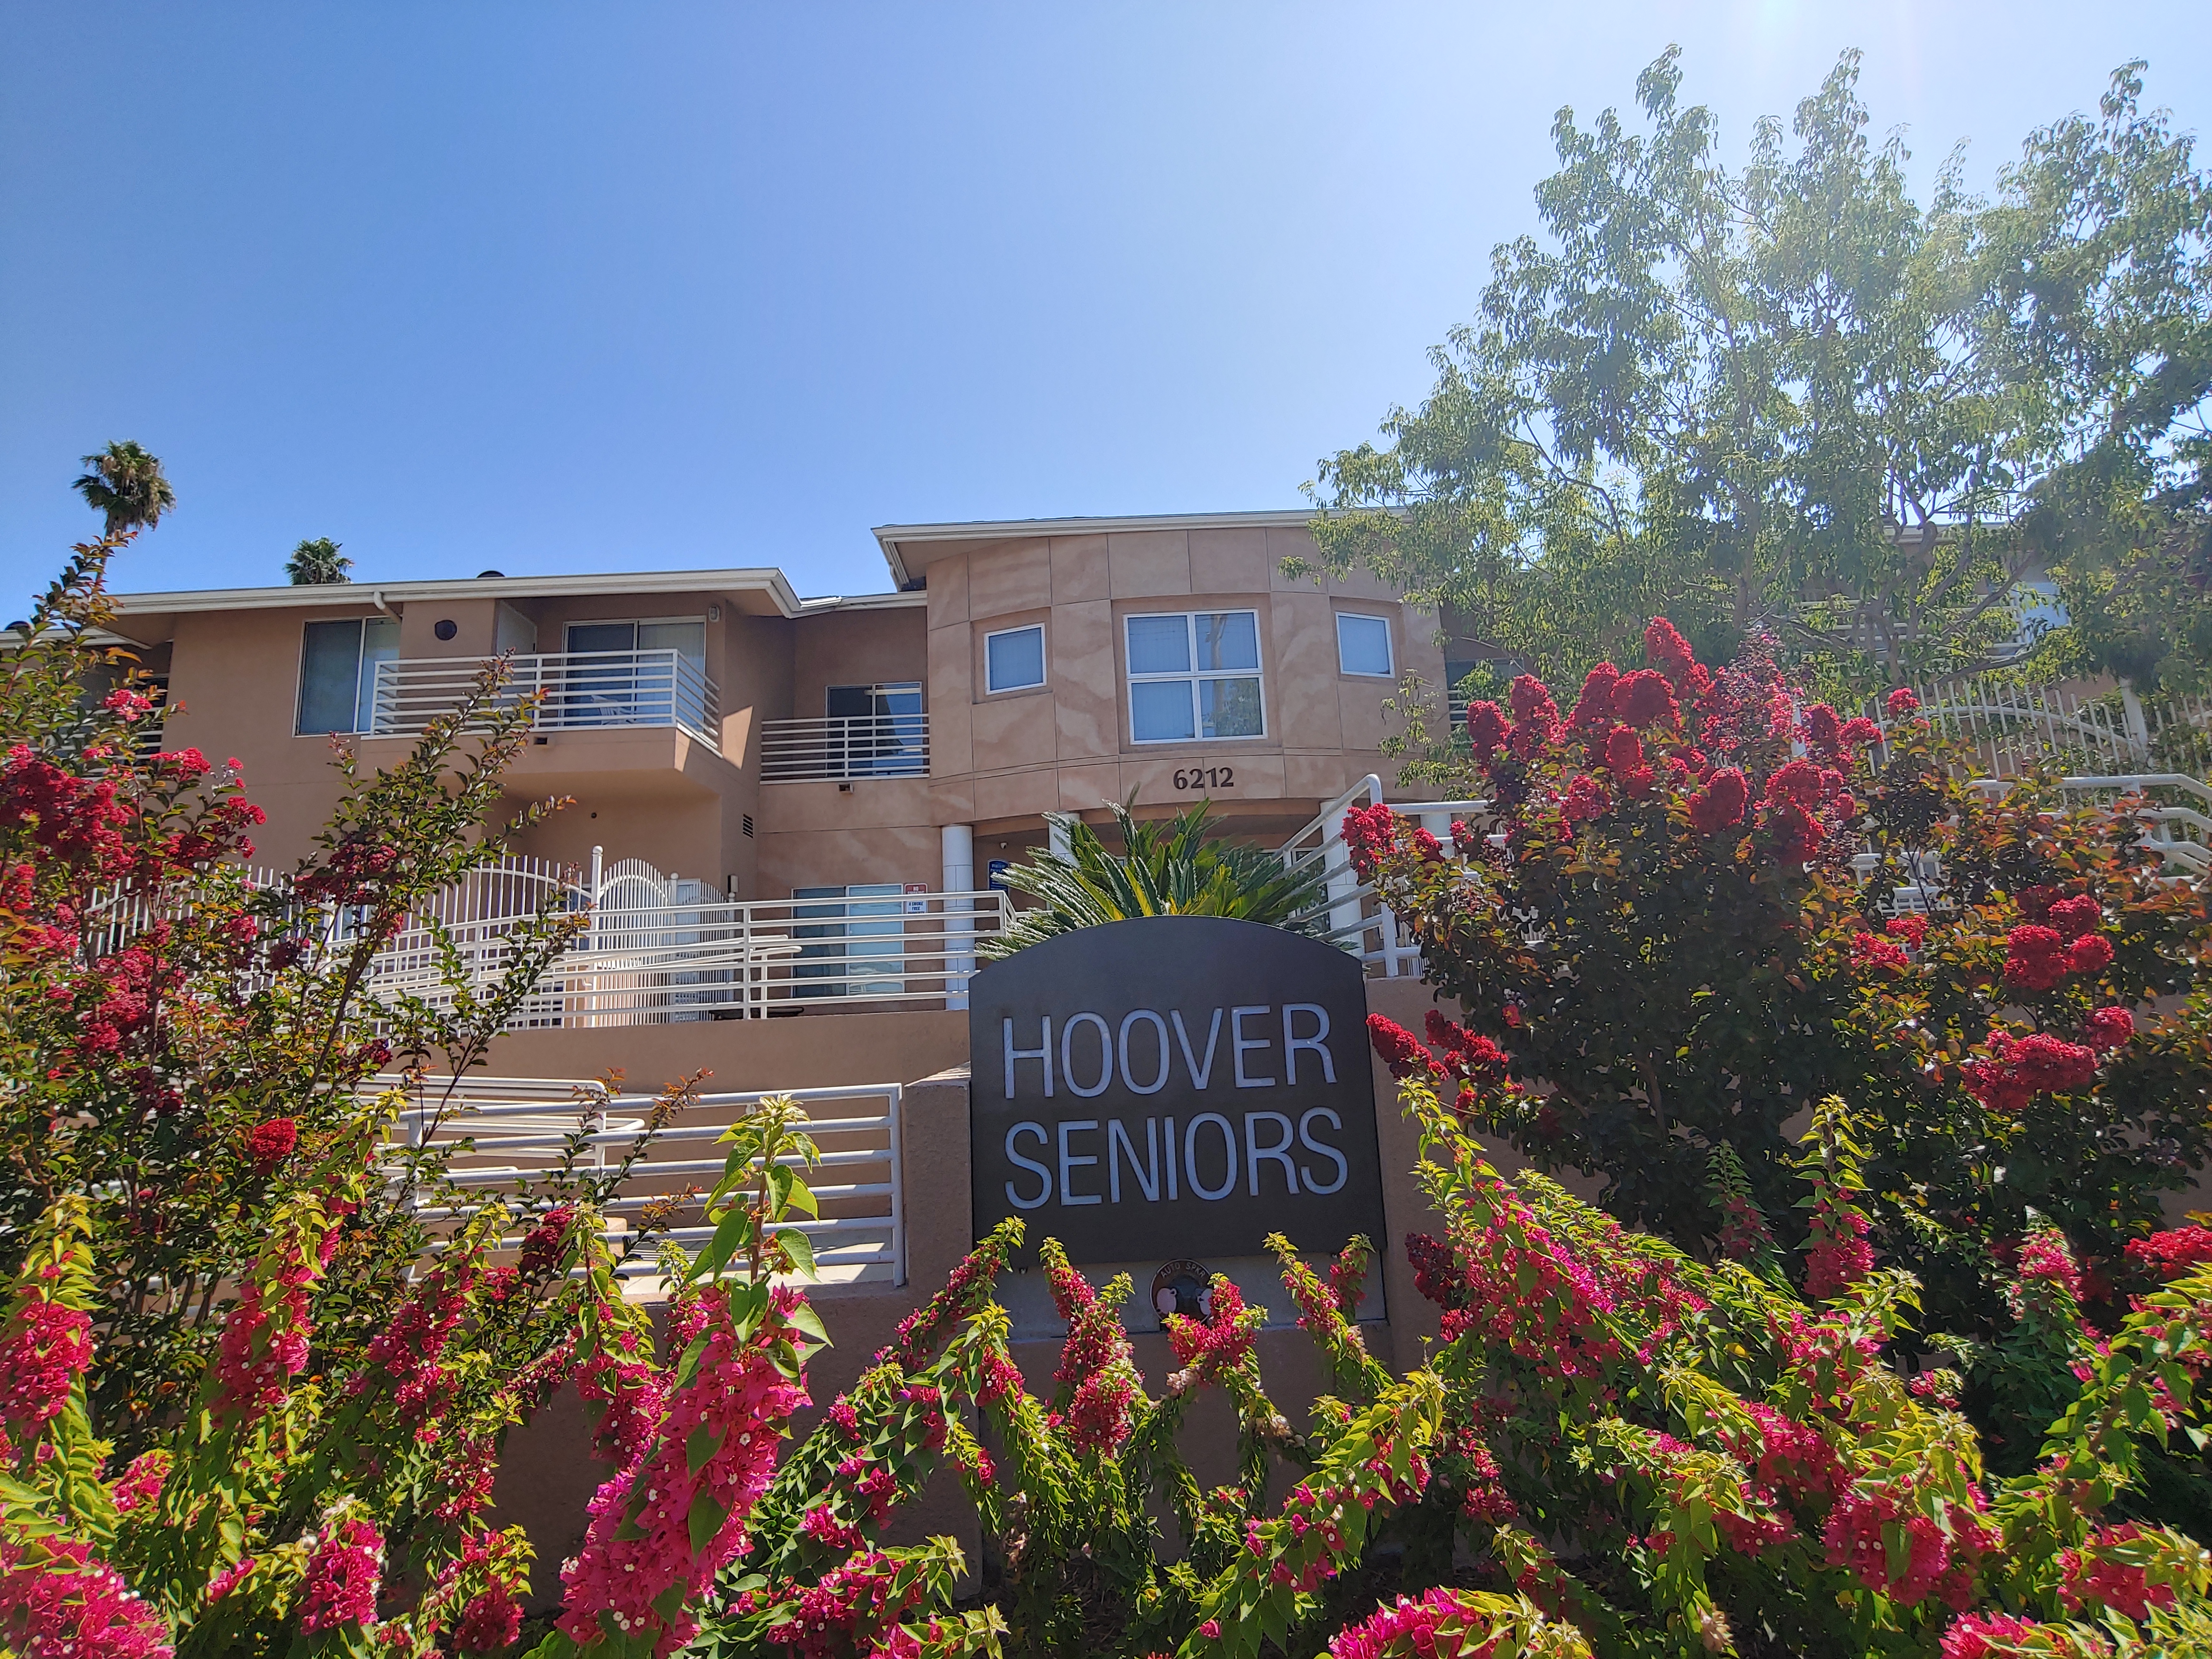 View of front side of building. large sign of building name hoover seniors. Accessibility ramp leading up to front of two story building. Large flower bed decorating front of building